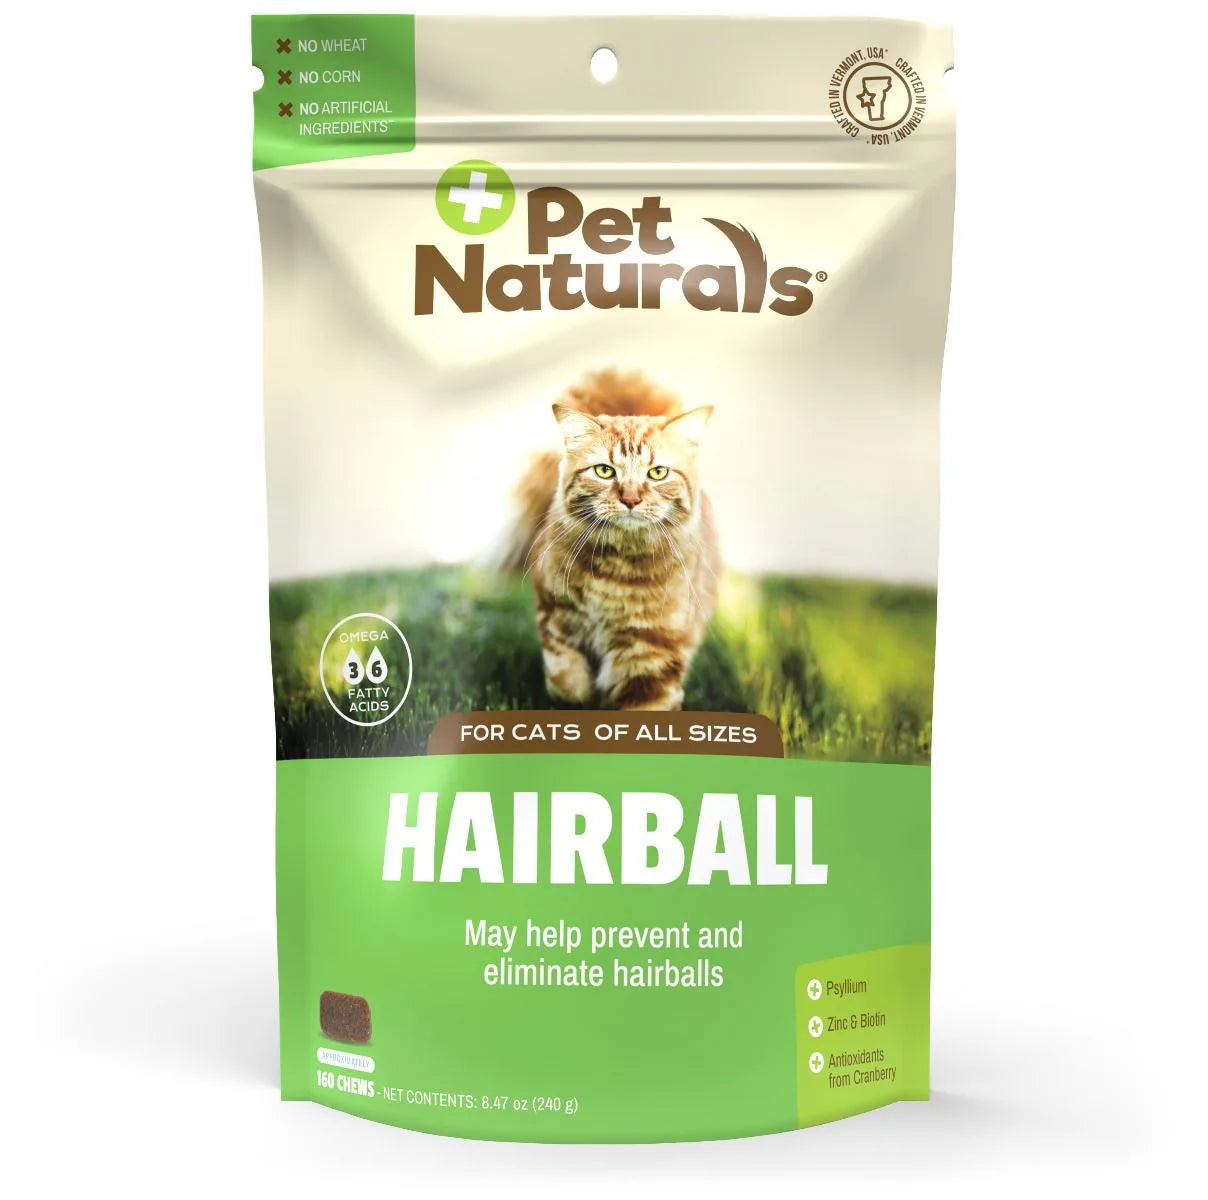 Pet Naturals - Hairball Chew for Cats (30 chews)